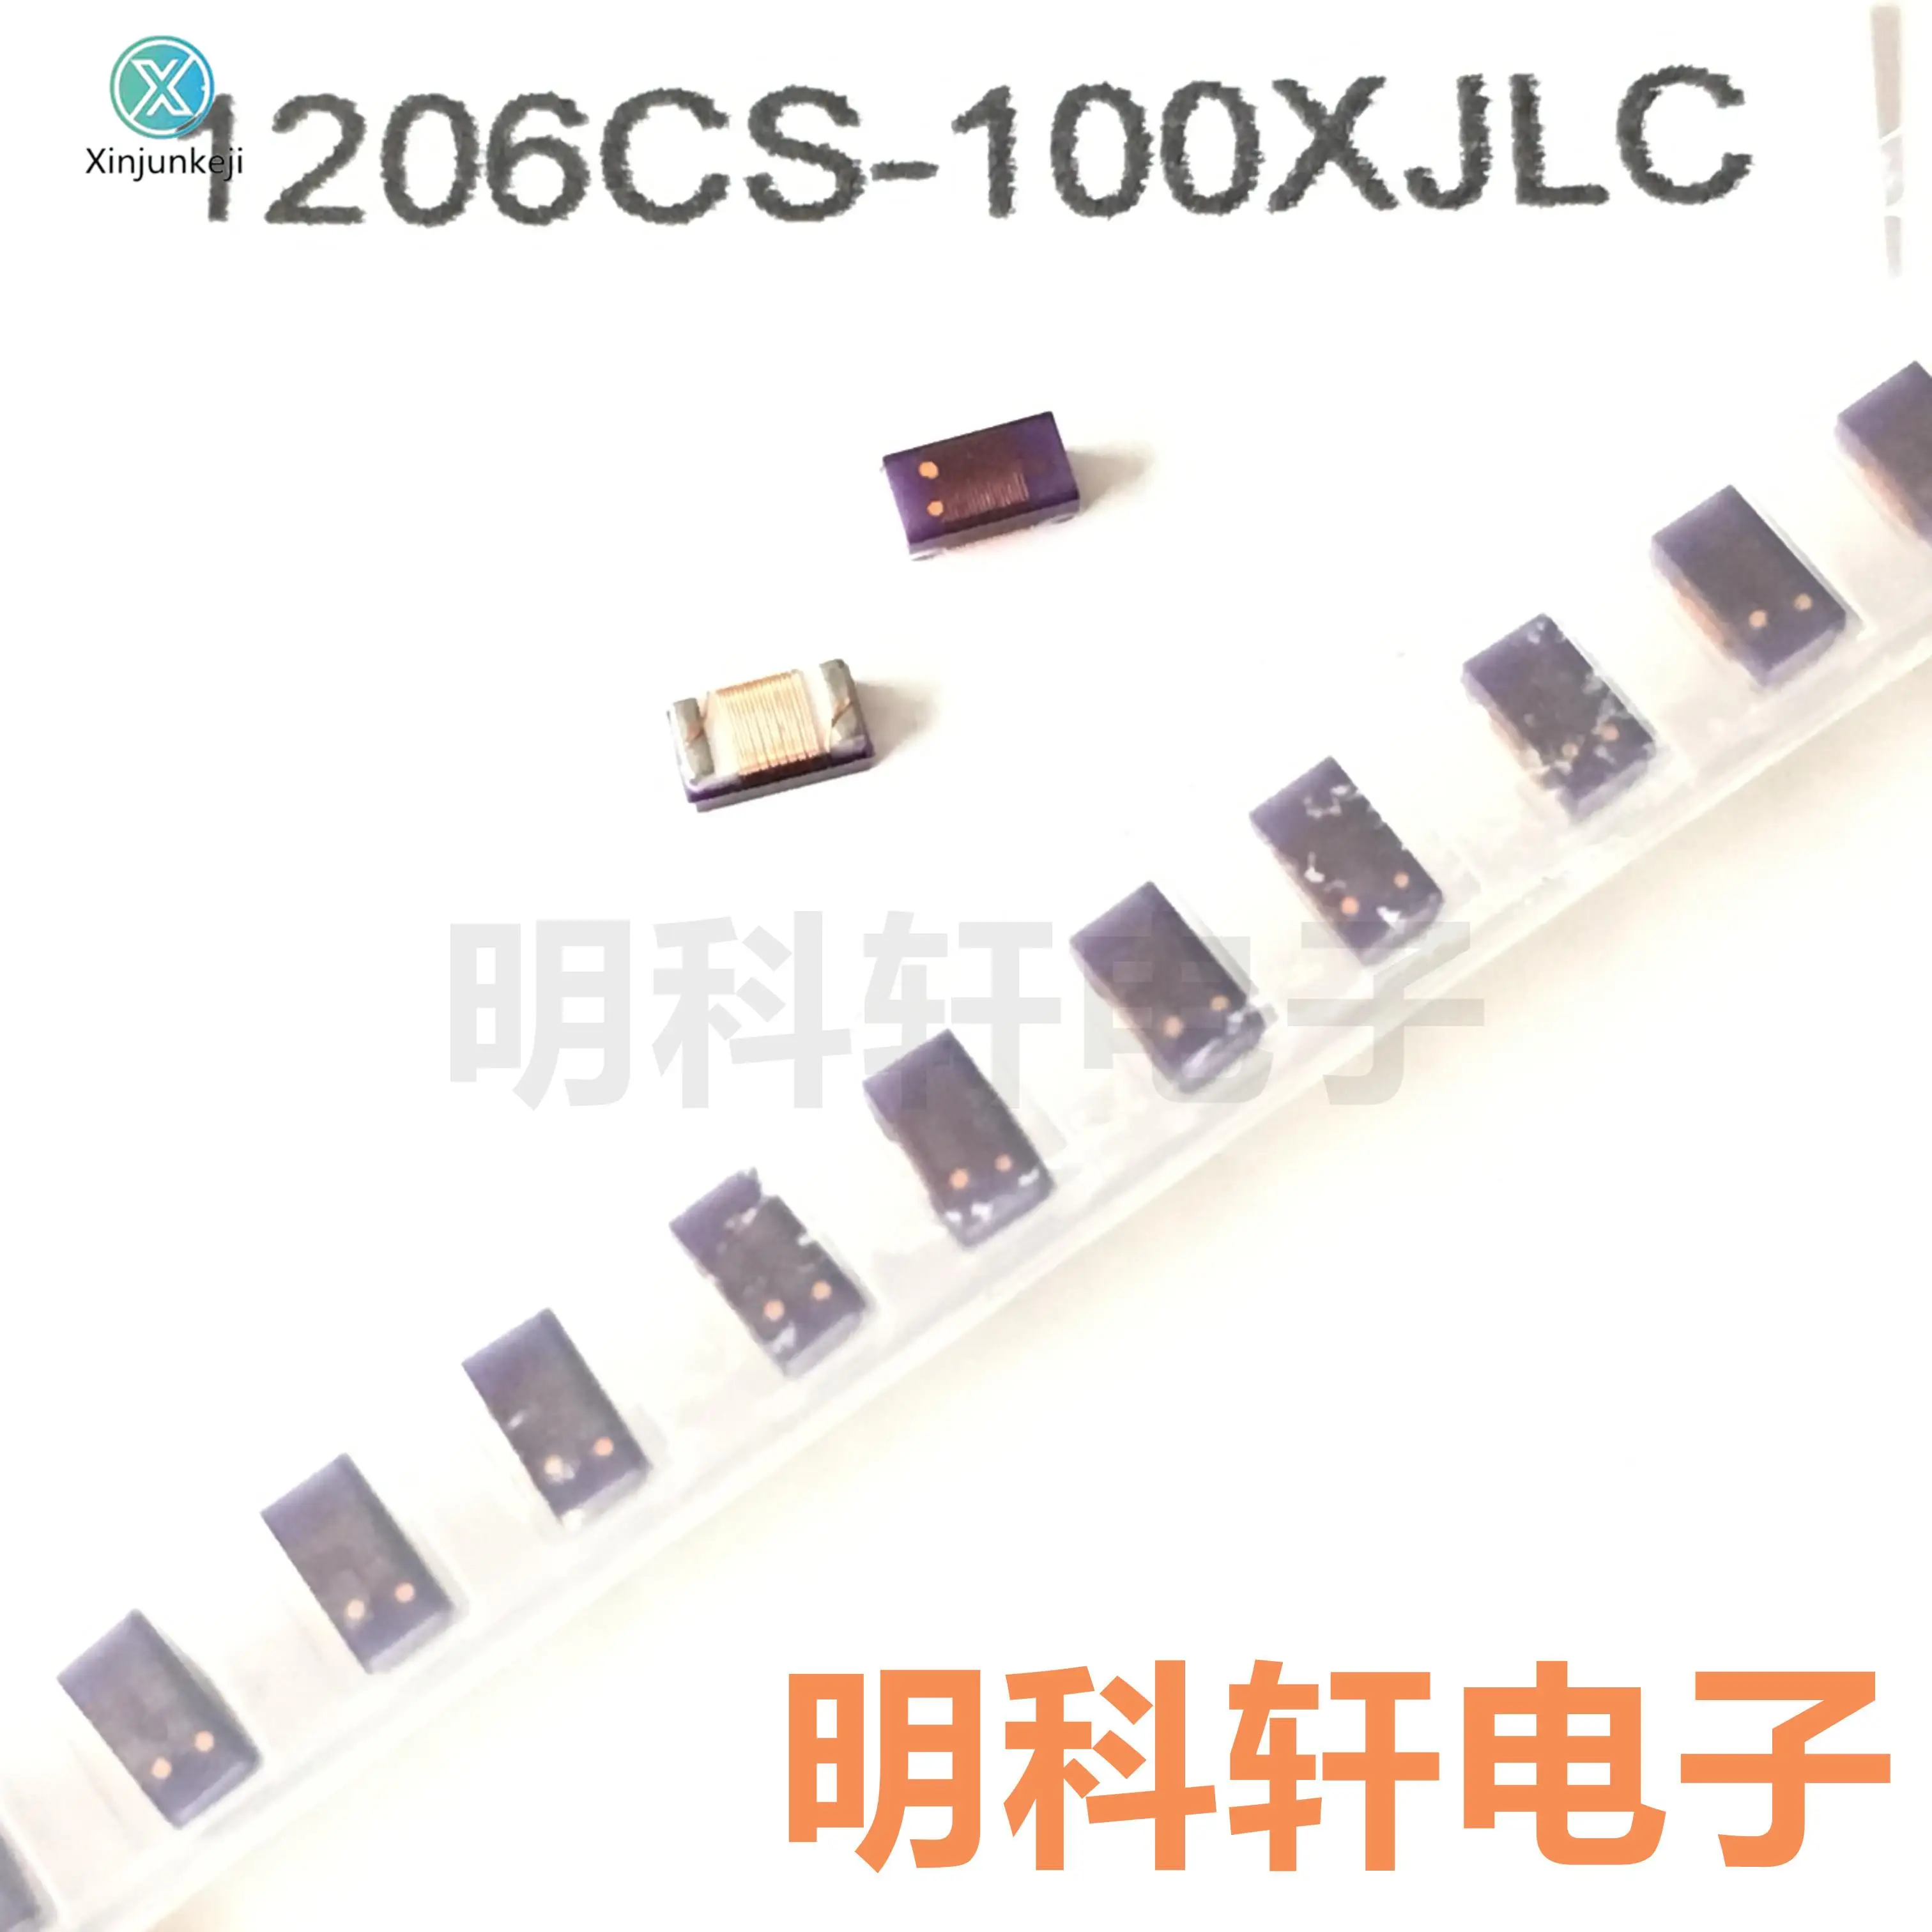 

30pcs orginal new 1206CS-100XJLC SMD high frequency wire wound inductor 1206 10NH